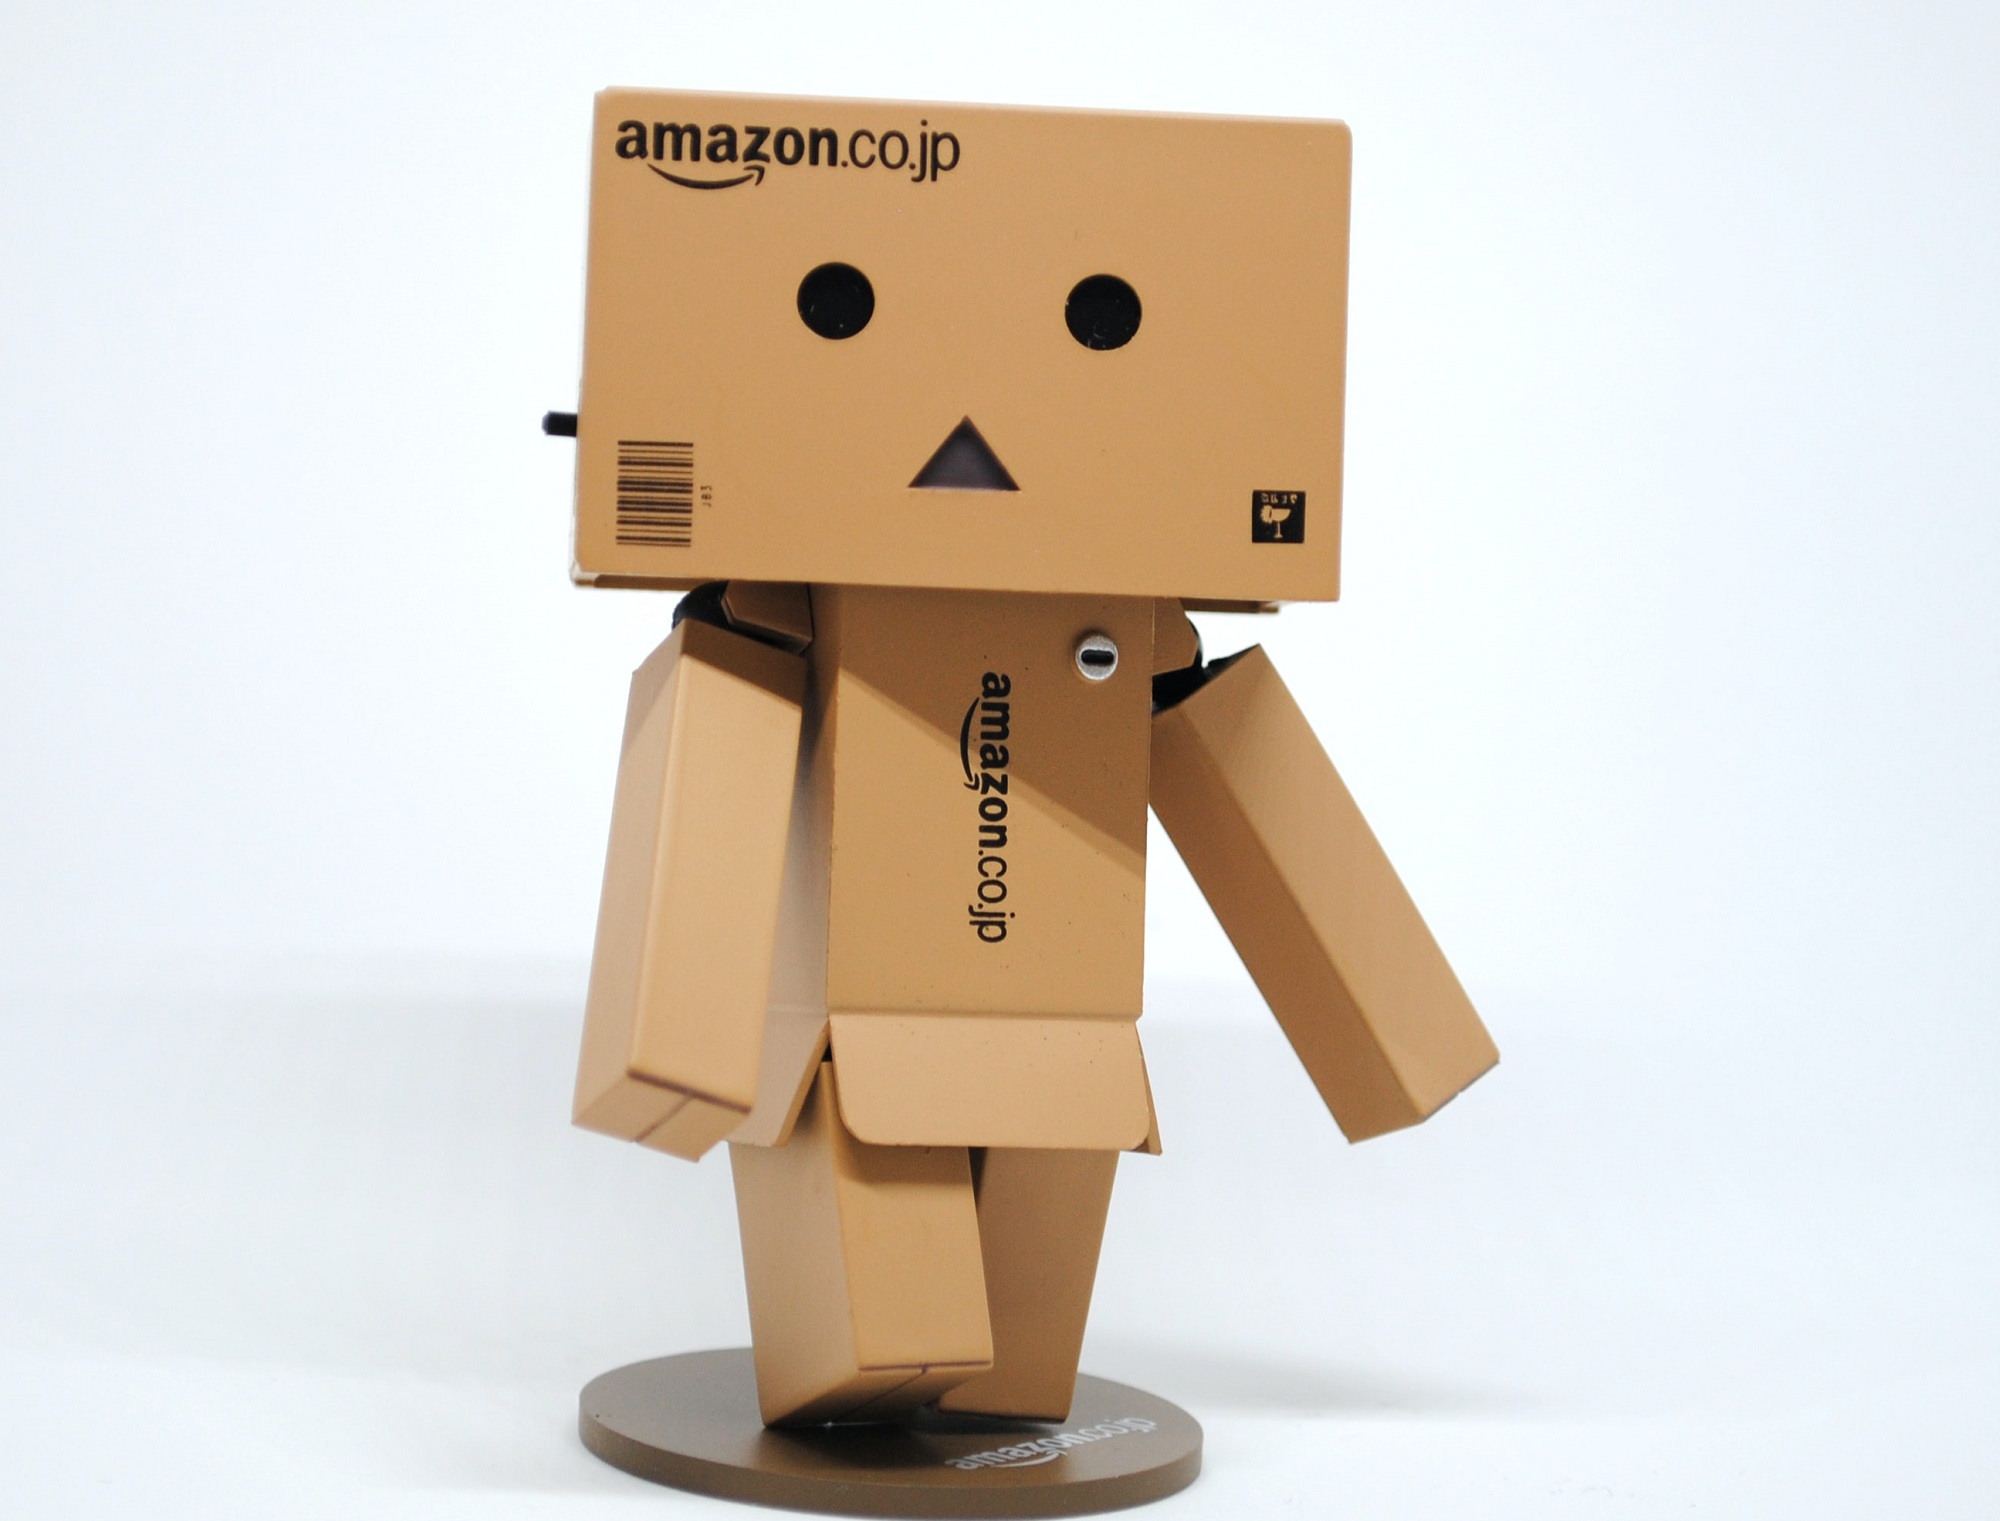 Amazon boxes formed into a robot like figure